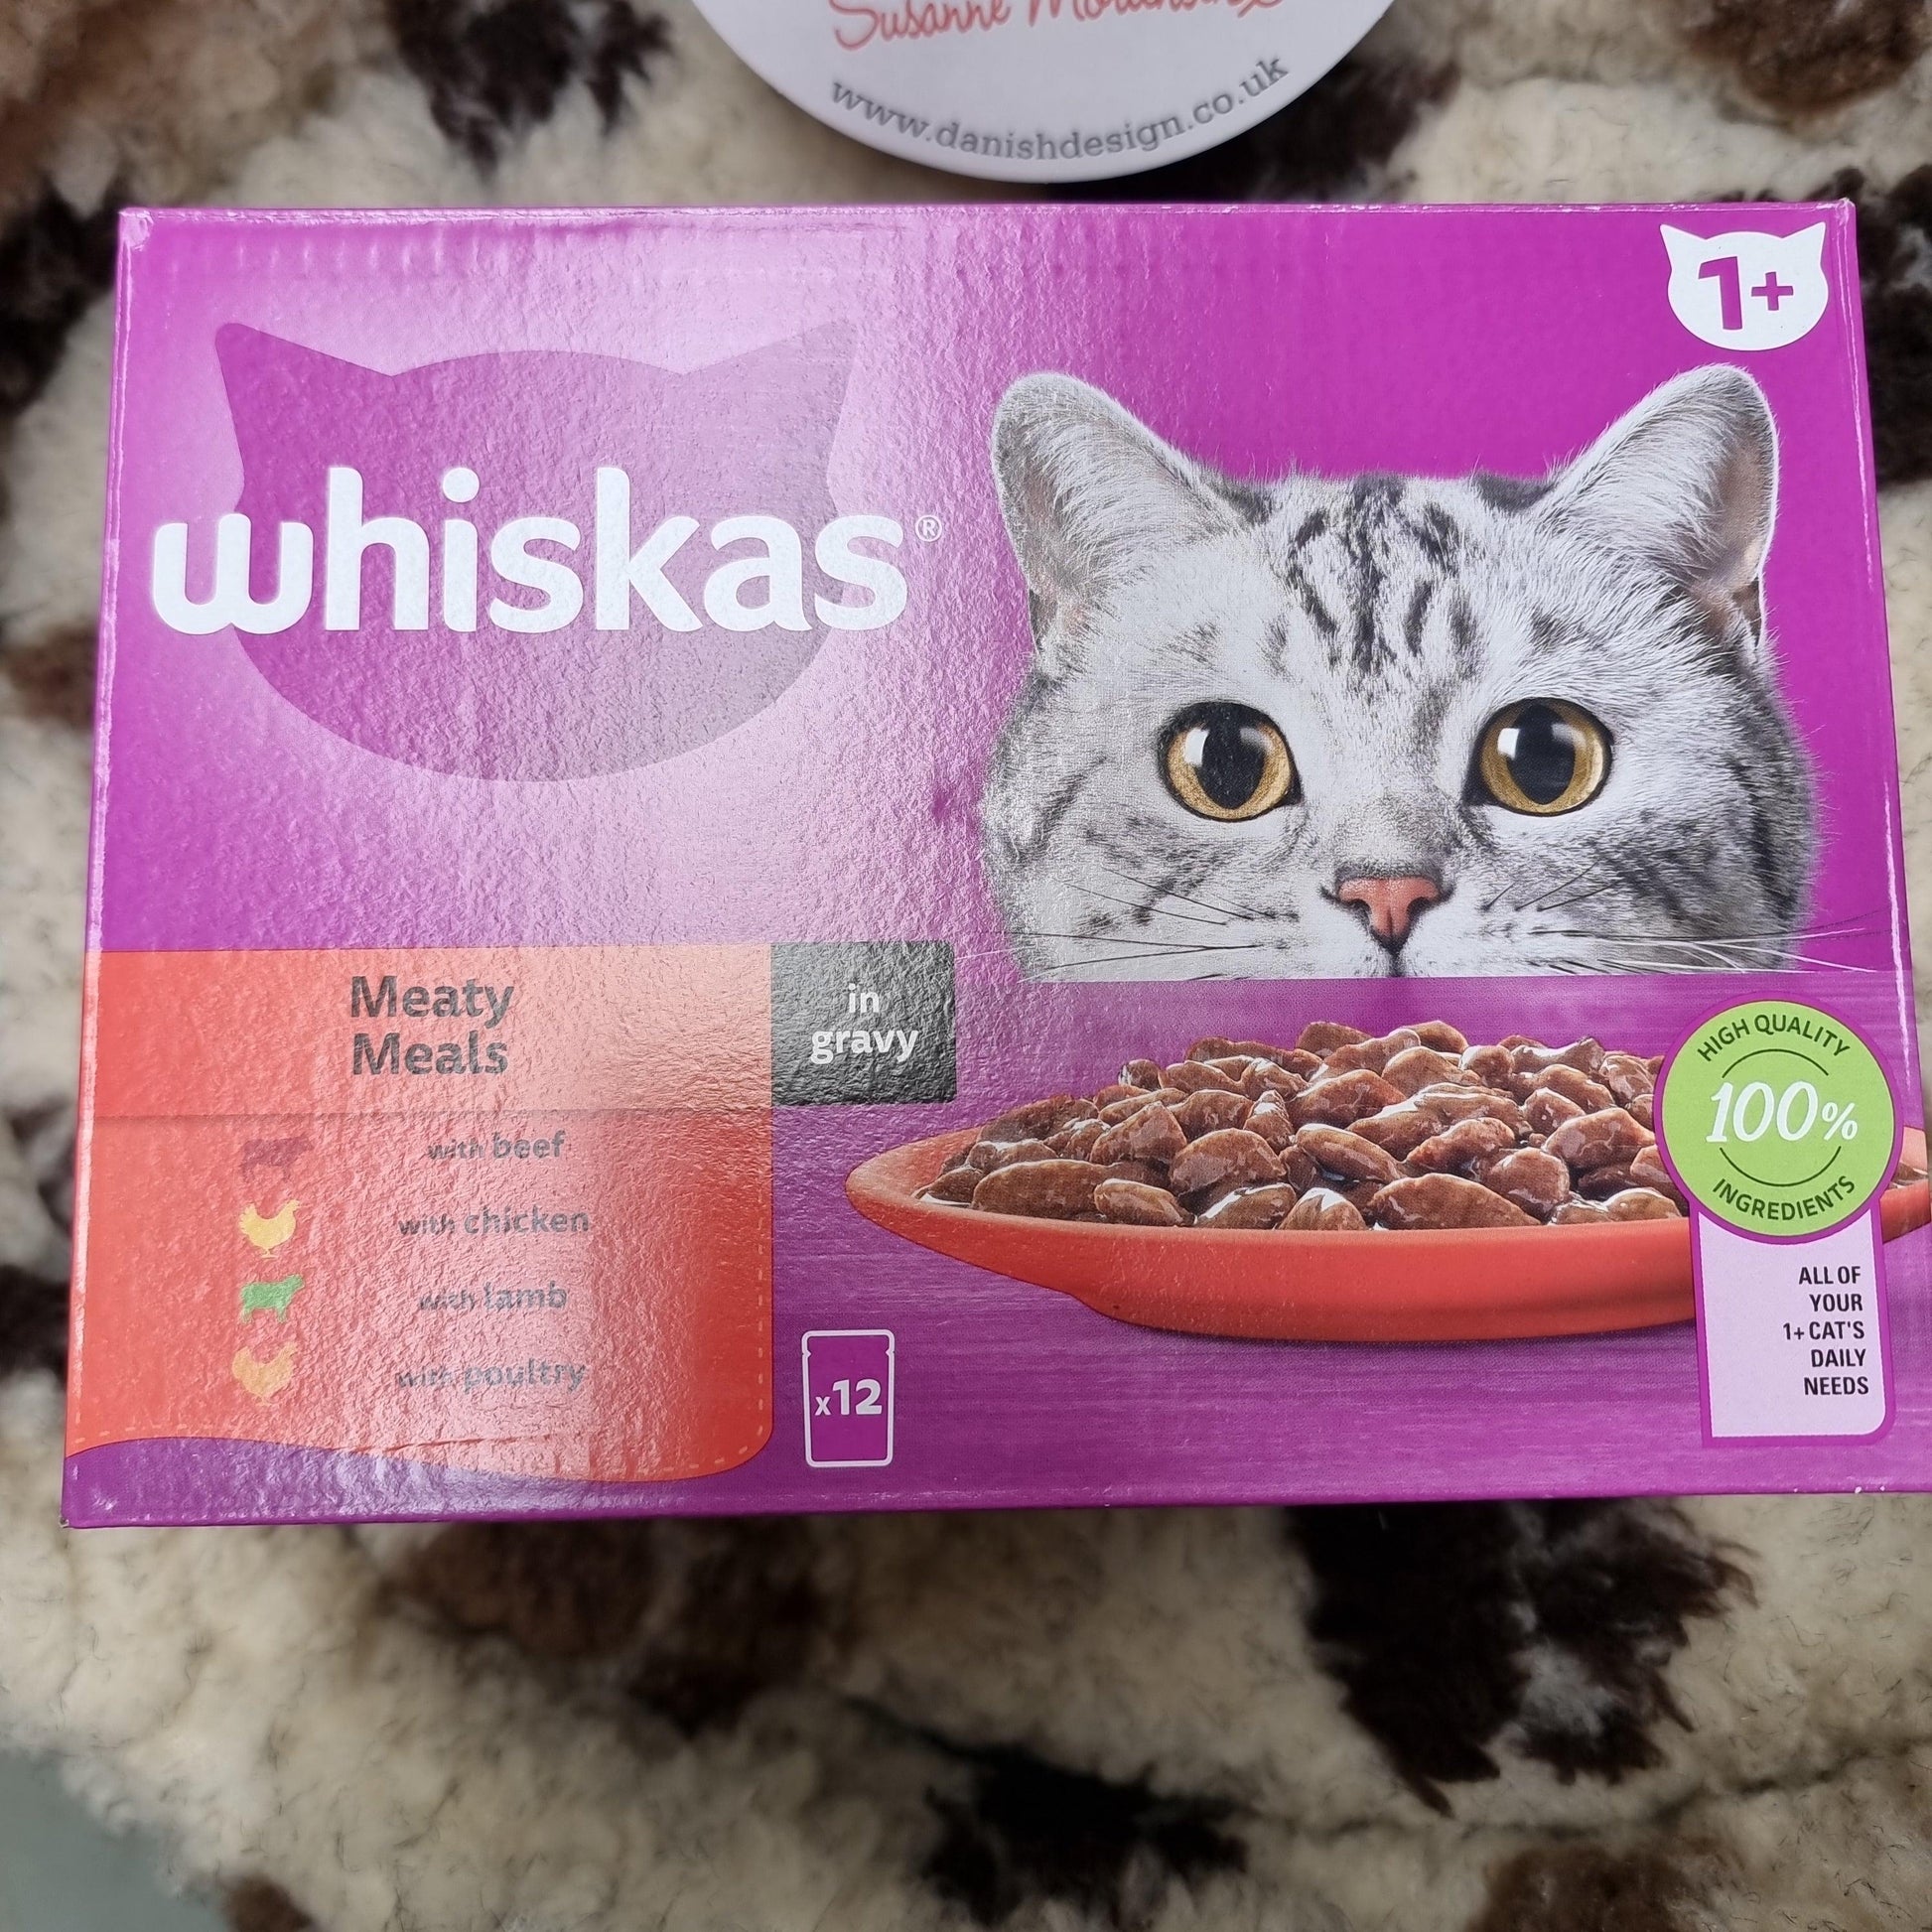 Whiskas 1+ Meaty Meals Adult Wet Cat Food Pouches in Gravy 12PK 85g - North East Pet Shop Whiskas